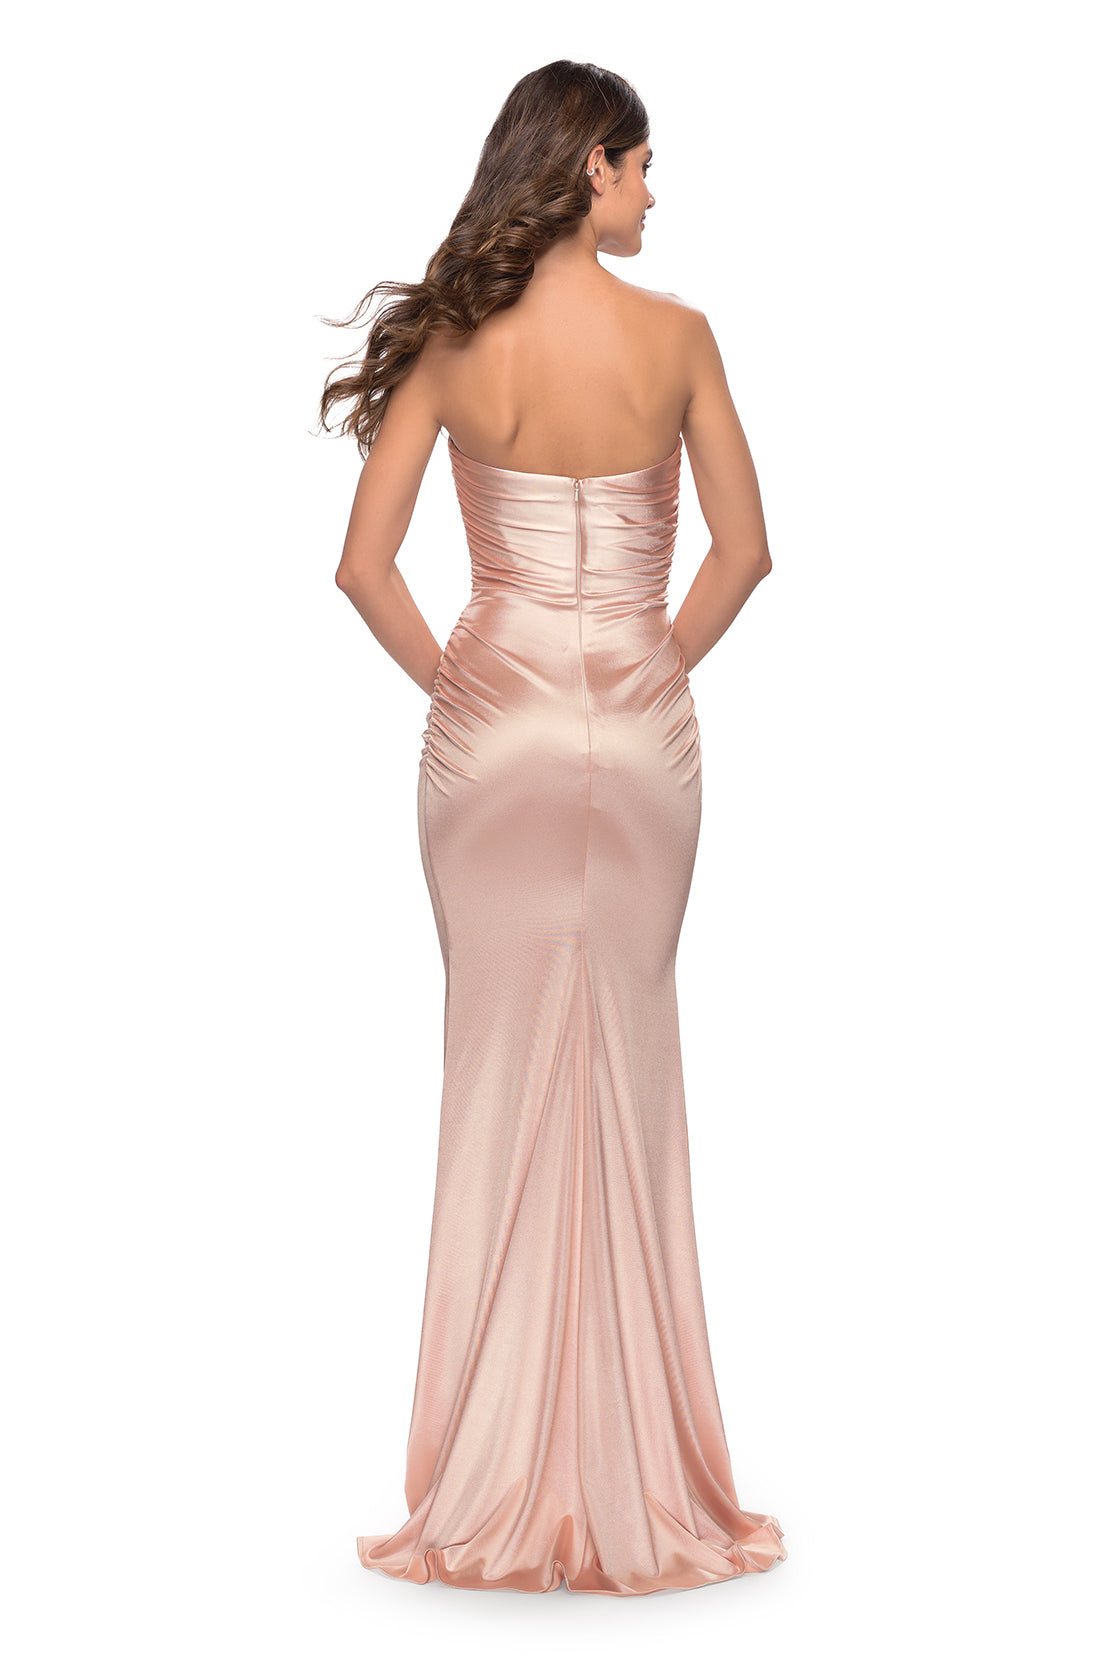 Make a statement at your prom with this stunning champagne stretch satin prom dress by La Femme, available at Madeline's Boutique in Toronto, Canada and Boca Raton, Florida. This elegant and glamorous dress features delicate beading and sequins on the bodice, thin shoulder straps, and a low V-cut back for a modern and sexy touch. Perfect for any prom-goer, this dress is sure to make you feel confident and beautiful all night long.